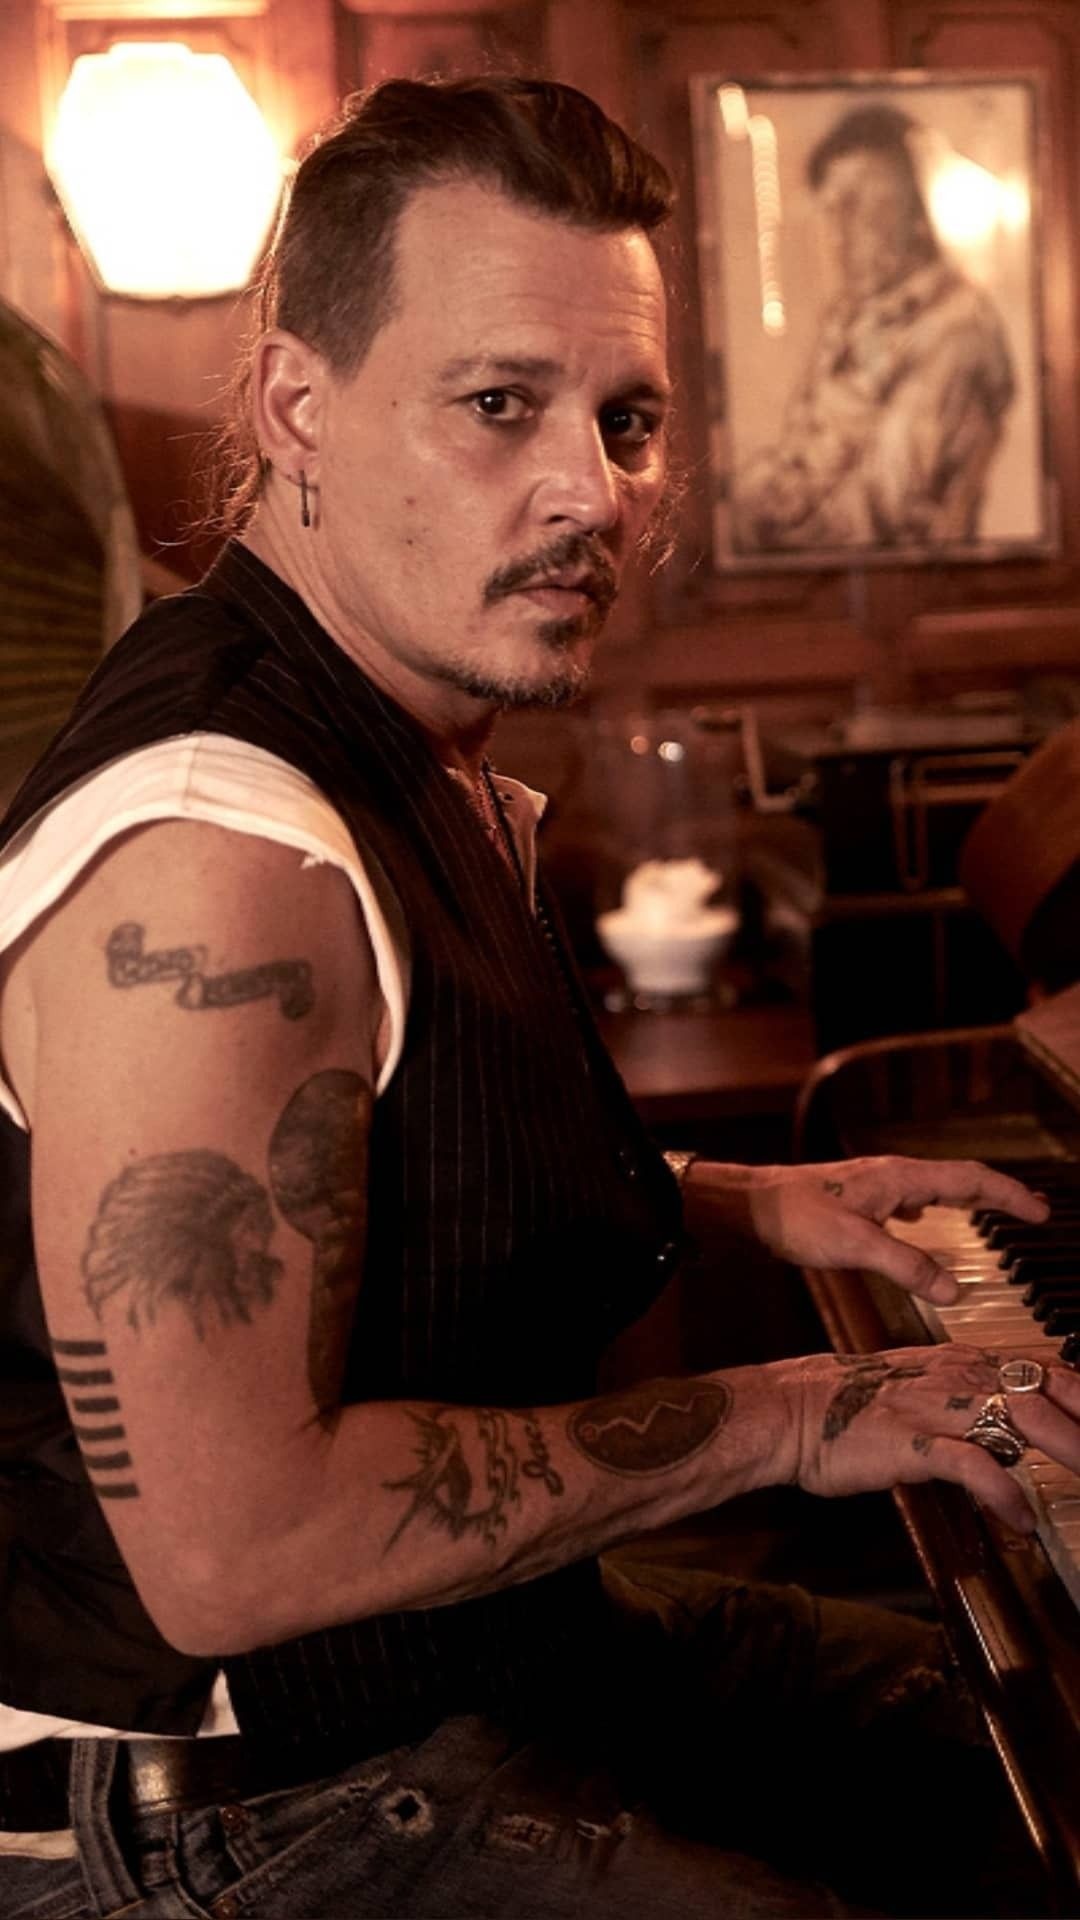 Johnny Depp: Starred in and co-produced his eighth film with Tim Burton, Dark Shadows (2012). 1080x1920 Full HD Background.